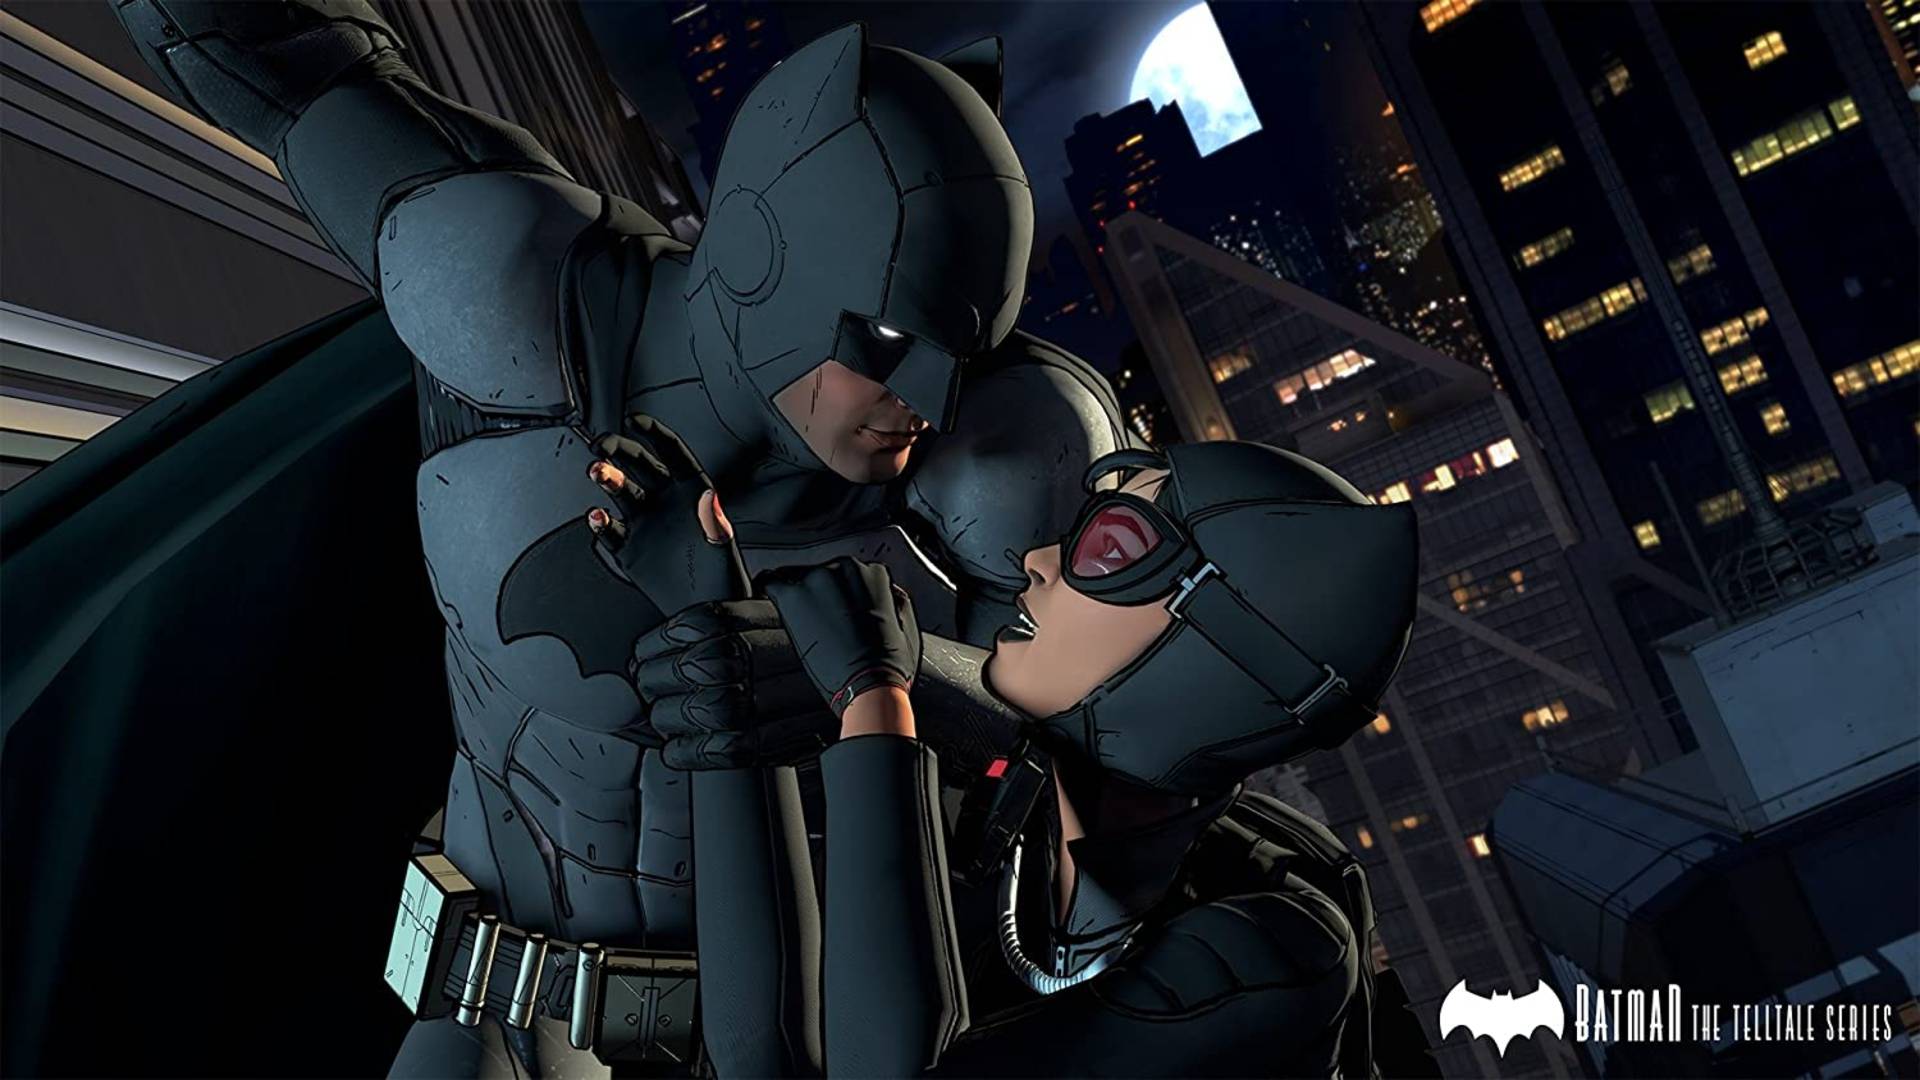 Batman: The Telltale Series goes free with Amazon Prime in June 2021